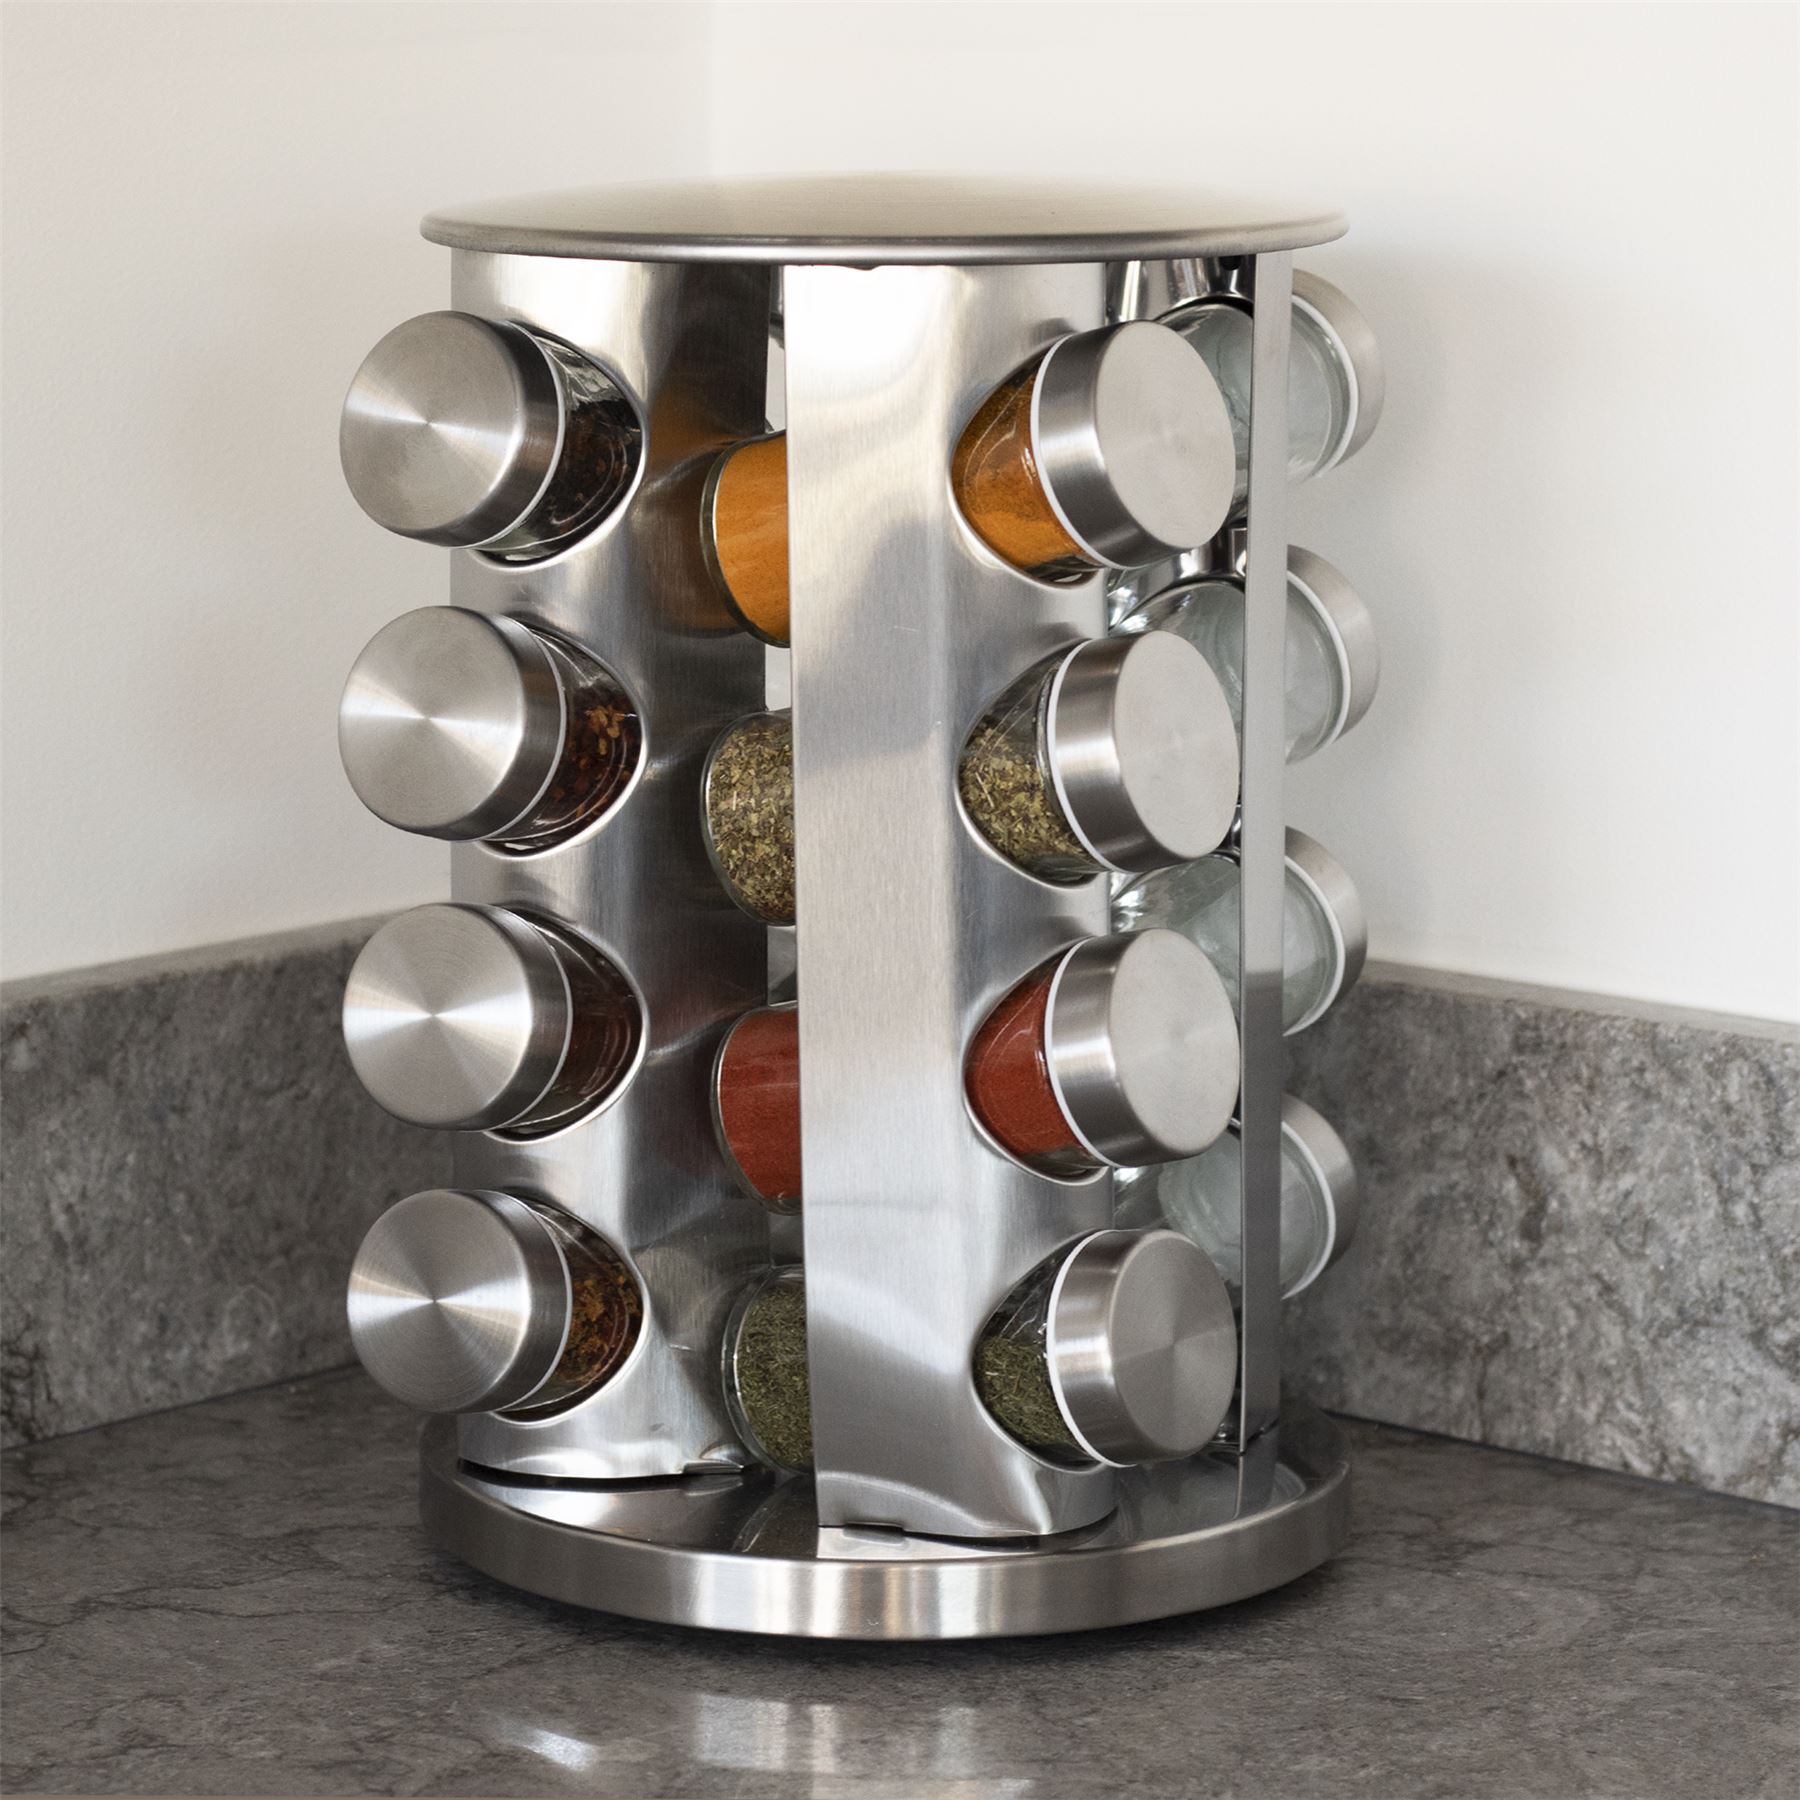 Revolving Spice Rack with 16 Glass Jars Included | M&W